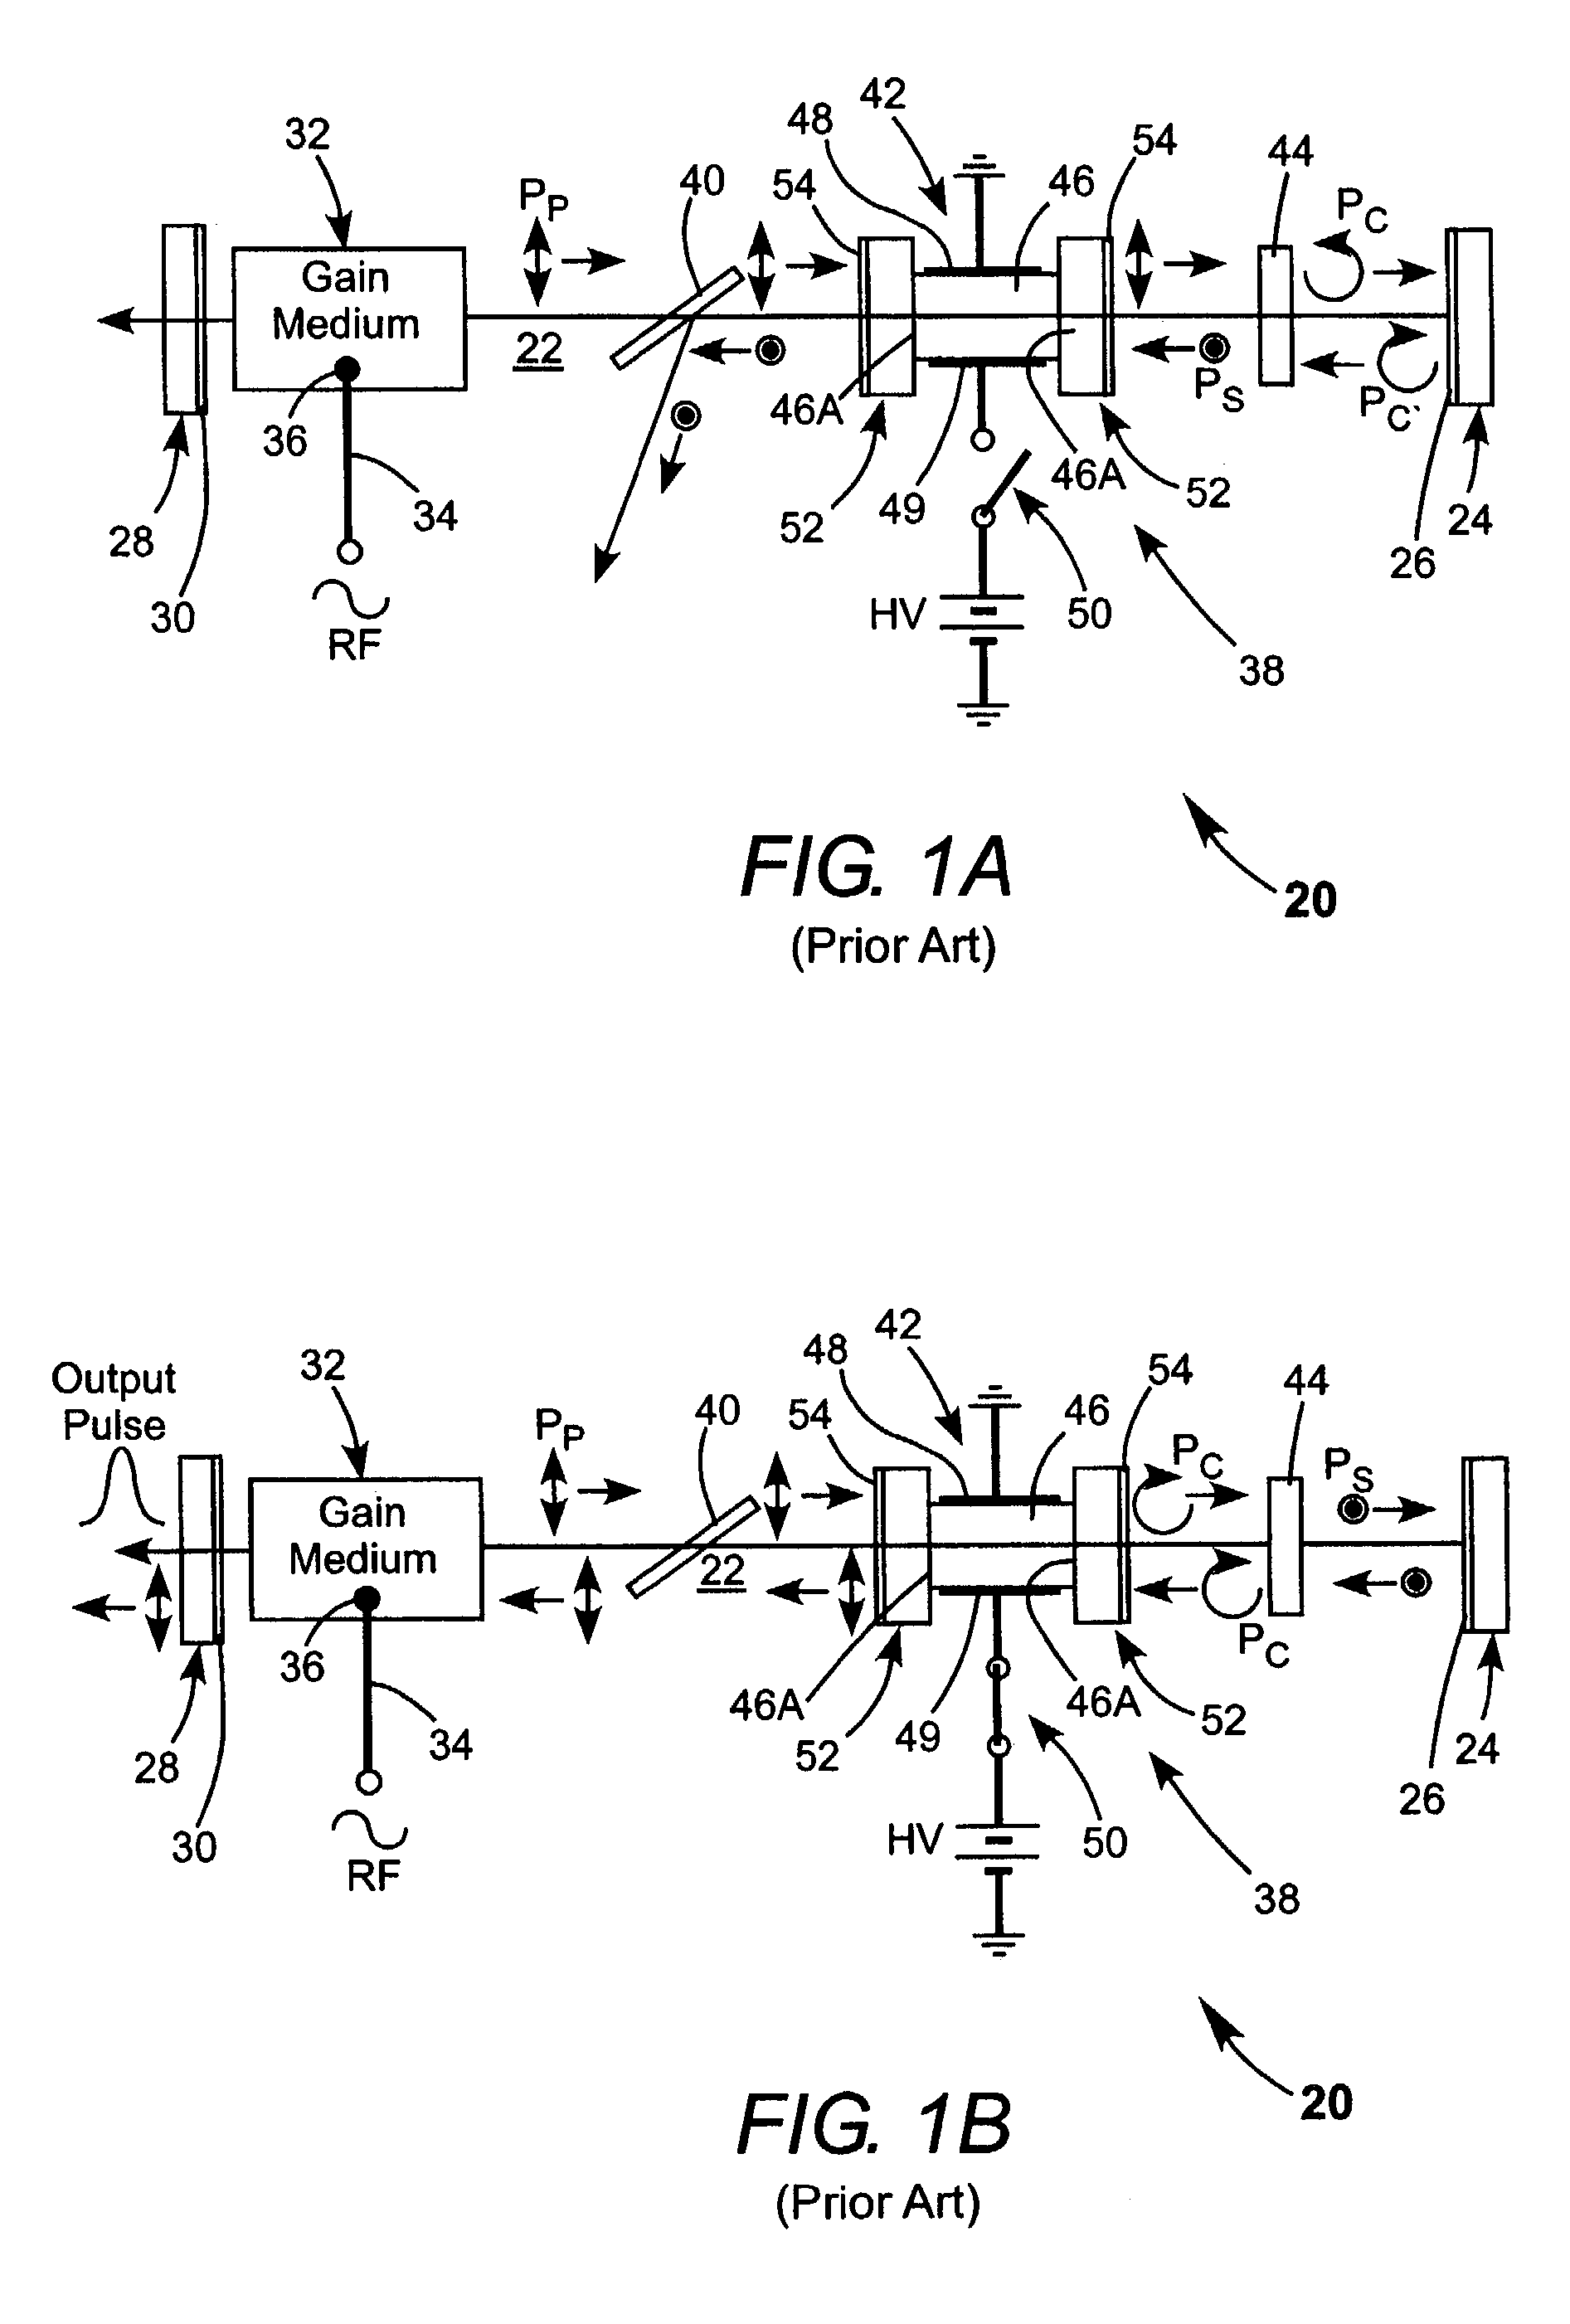 Pulsed CO2 laser including an optical damage resistant electro-optical switching arrangement